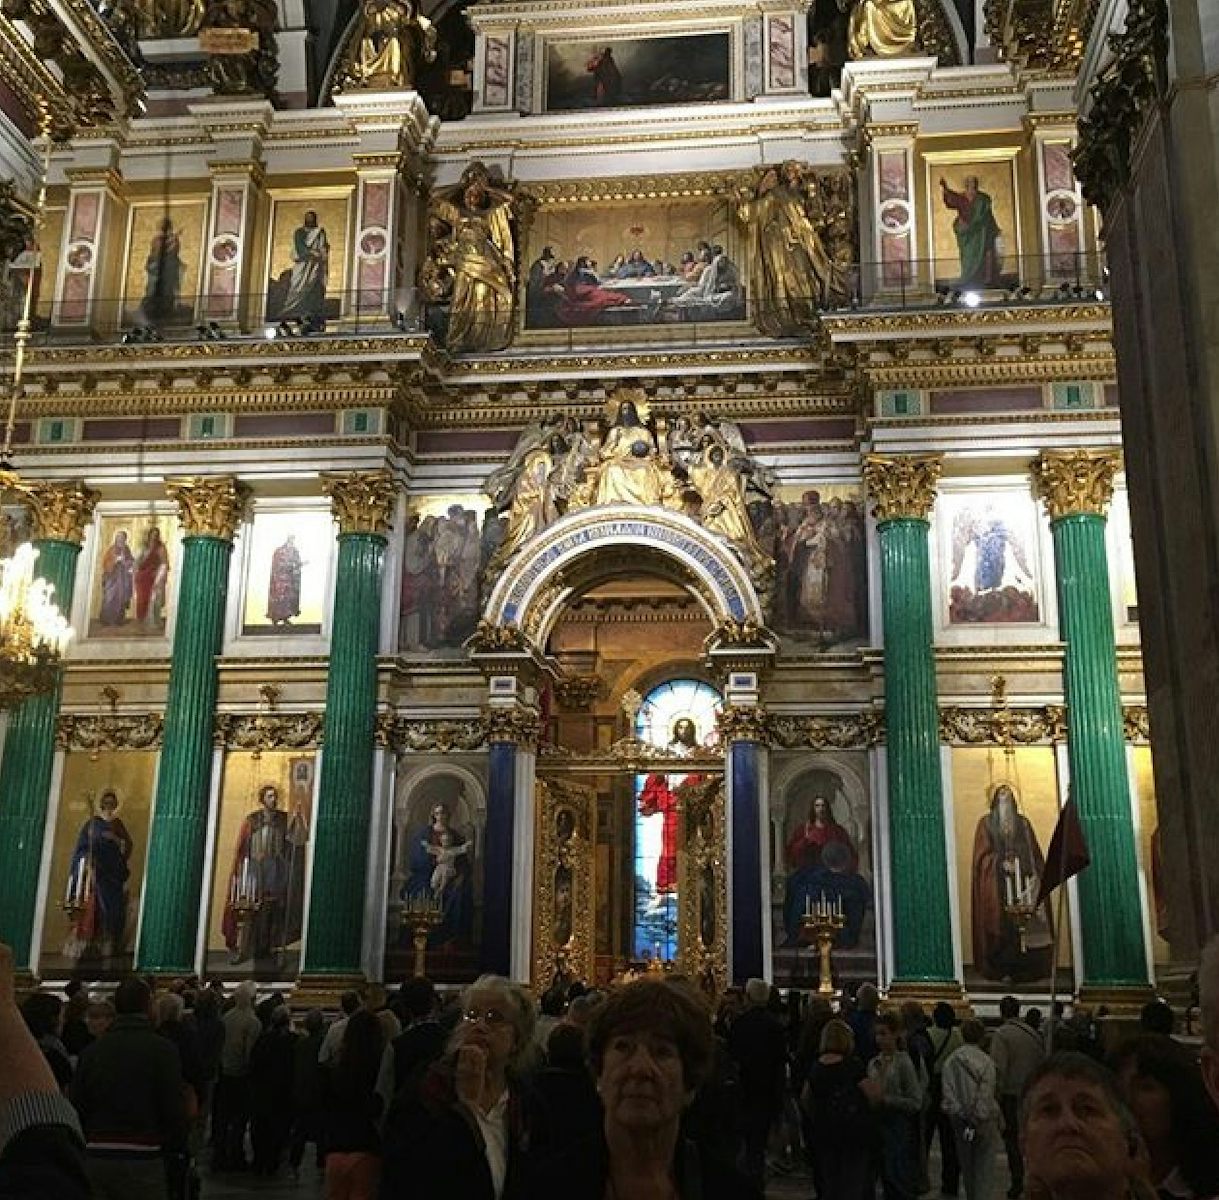 Tour of St Isaac's Cathedral